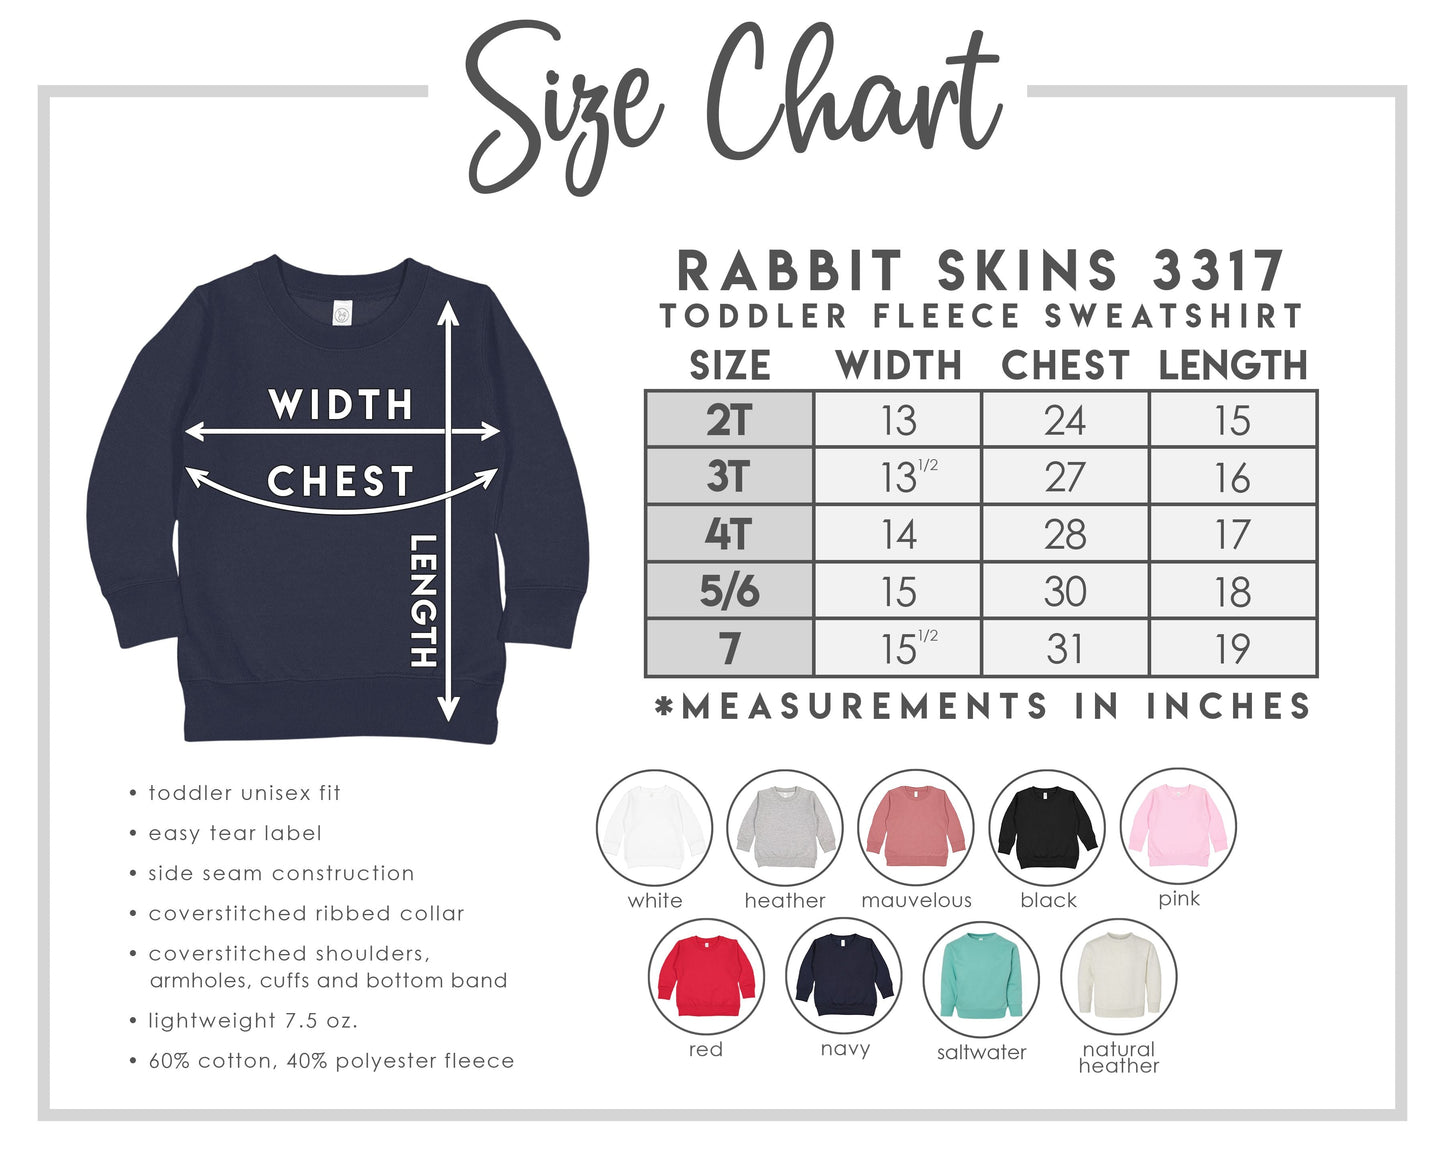 Spotted Bunny With Glasses | Toddler Sweatshirt